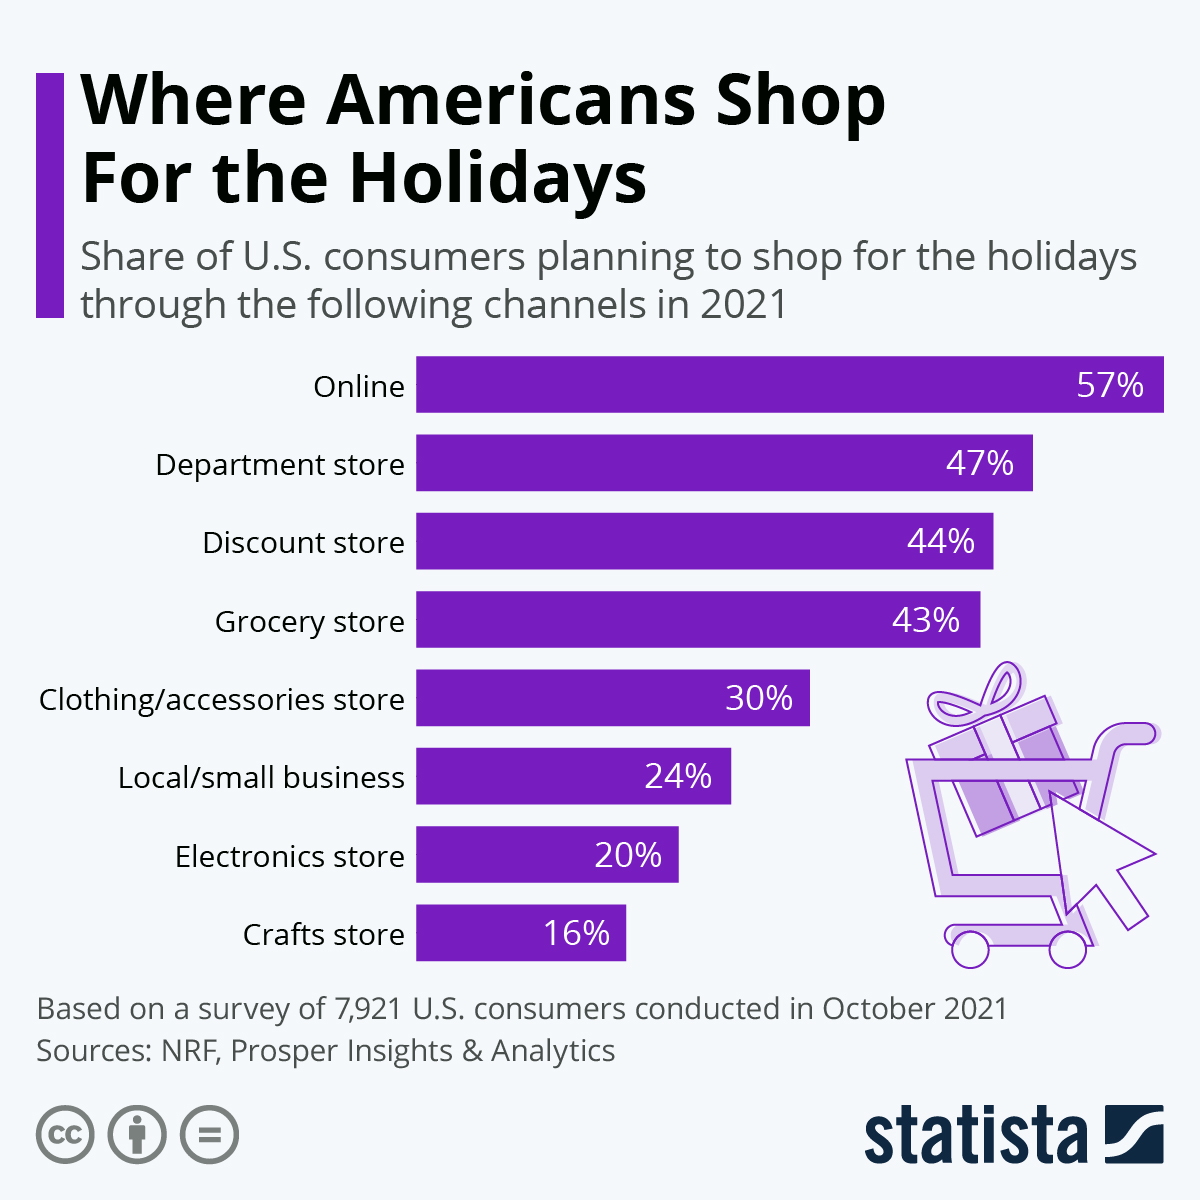 Where Americans Shop For the Holidays